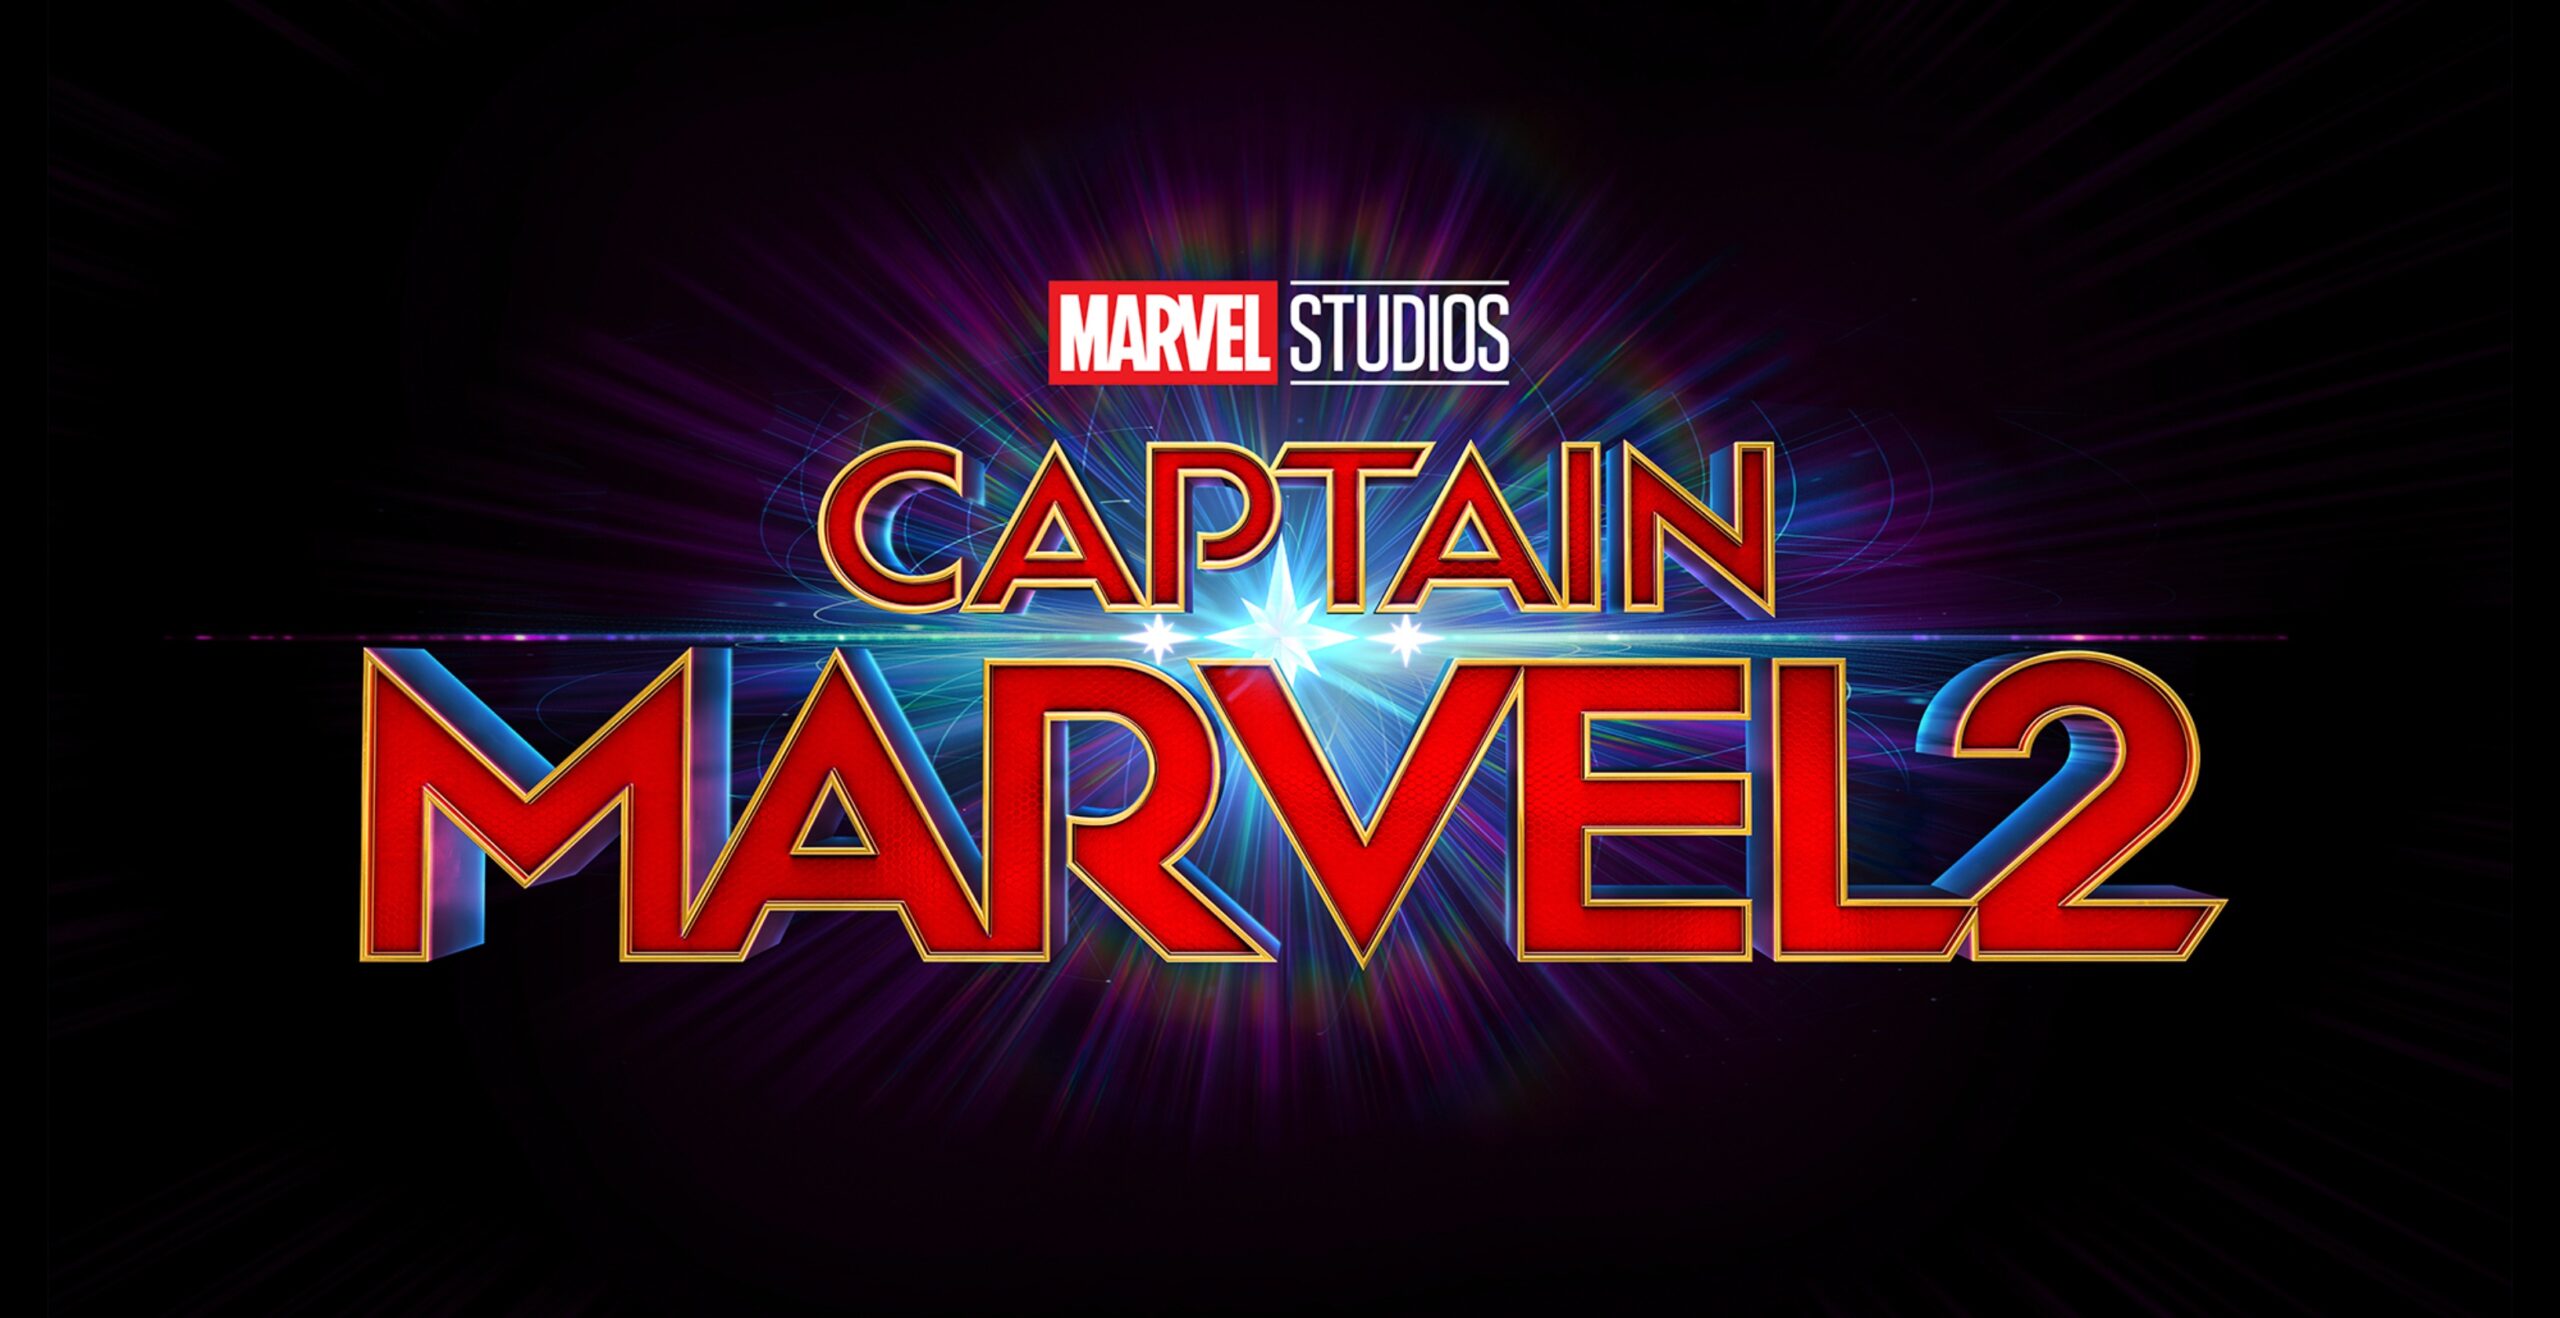 'Captain Marvel 2' Will Begin Filming This May